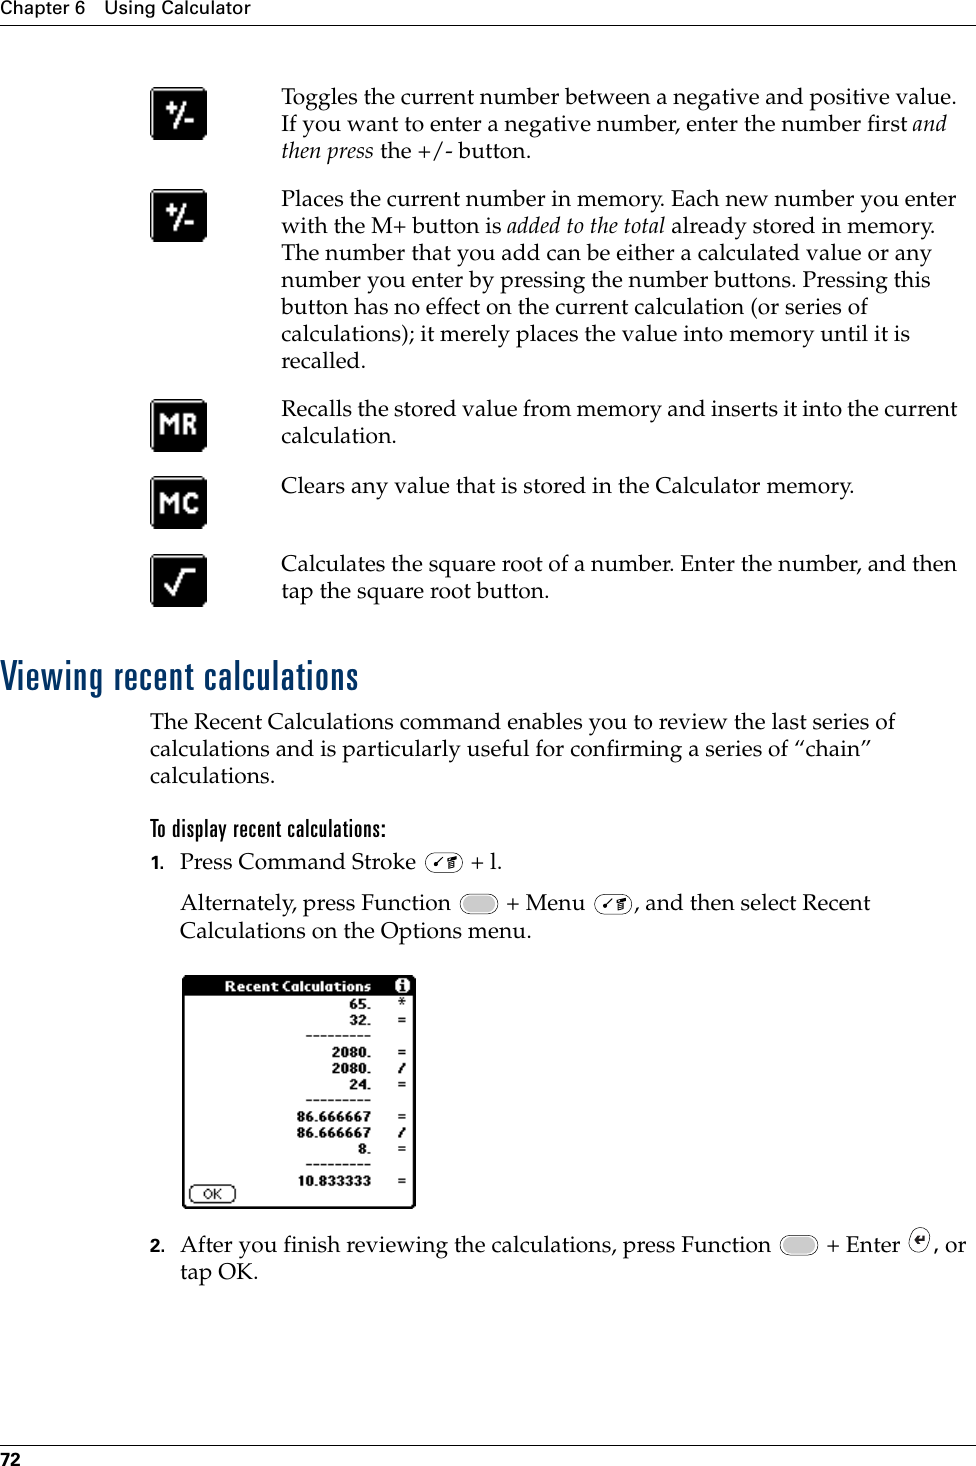 Chapter 6 Using Calculator72Viewing recent calculationsThe Recent Calculations command enables you to review the last series of calculations and is particularly useful for confirming a series of “chain” calculations.To display recent calculations:1. Press Command Stroke   + l.Alternately, press Function   + Menu  , and then select Recent Calculations on the Options menu.2. After you finish reviewing the calculations, press Function   + Enter  , or tap OK.Toggles the current number between a negative and positive value. If you want to enter a negative number, enter the number first and then press the +/- button.Places the current number in memory. Each new number you enter with the M+ button is added to the total already stored in memory. The number that you add can be either a calculated value or any number you enter by pressing the number buttons. Pressing this button has no effect on the current calculation (or series of calculations); it merely places the value into memory until it is recalled.Recalls the stored value from memory and inserts it into the current calculation.Clears any value that is stored in the Calculator memory.Calculates the square root of a number. Enter the number, and then tap the square root button.Palm, Inc. Confidential